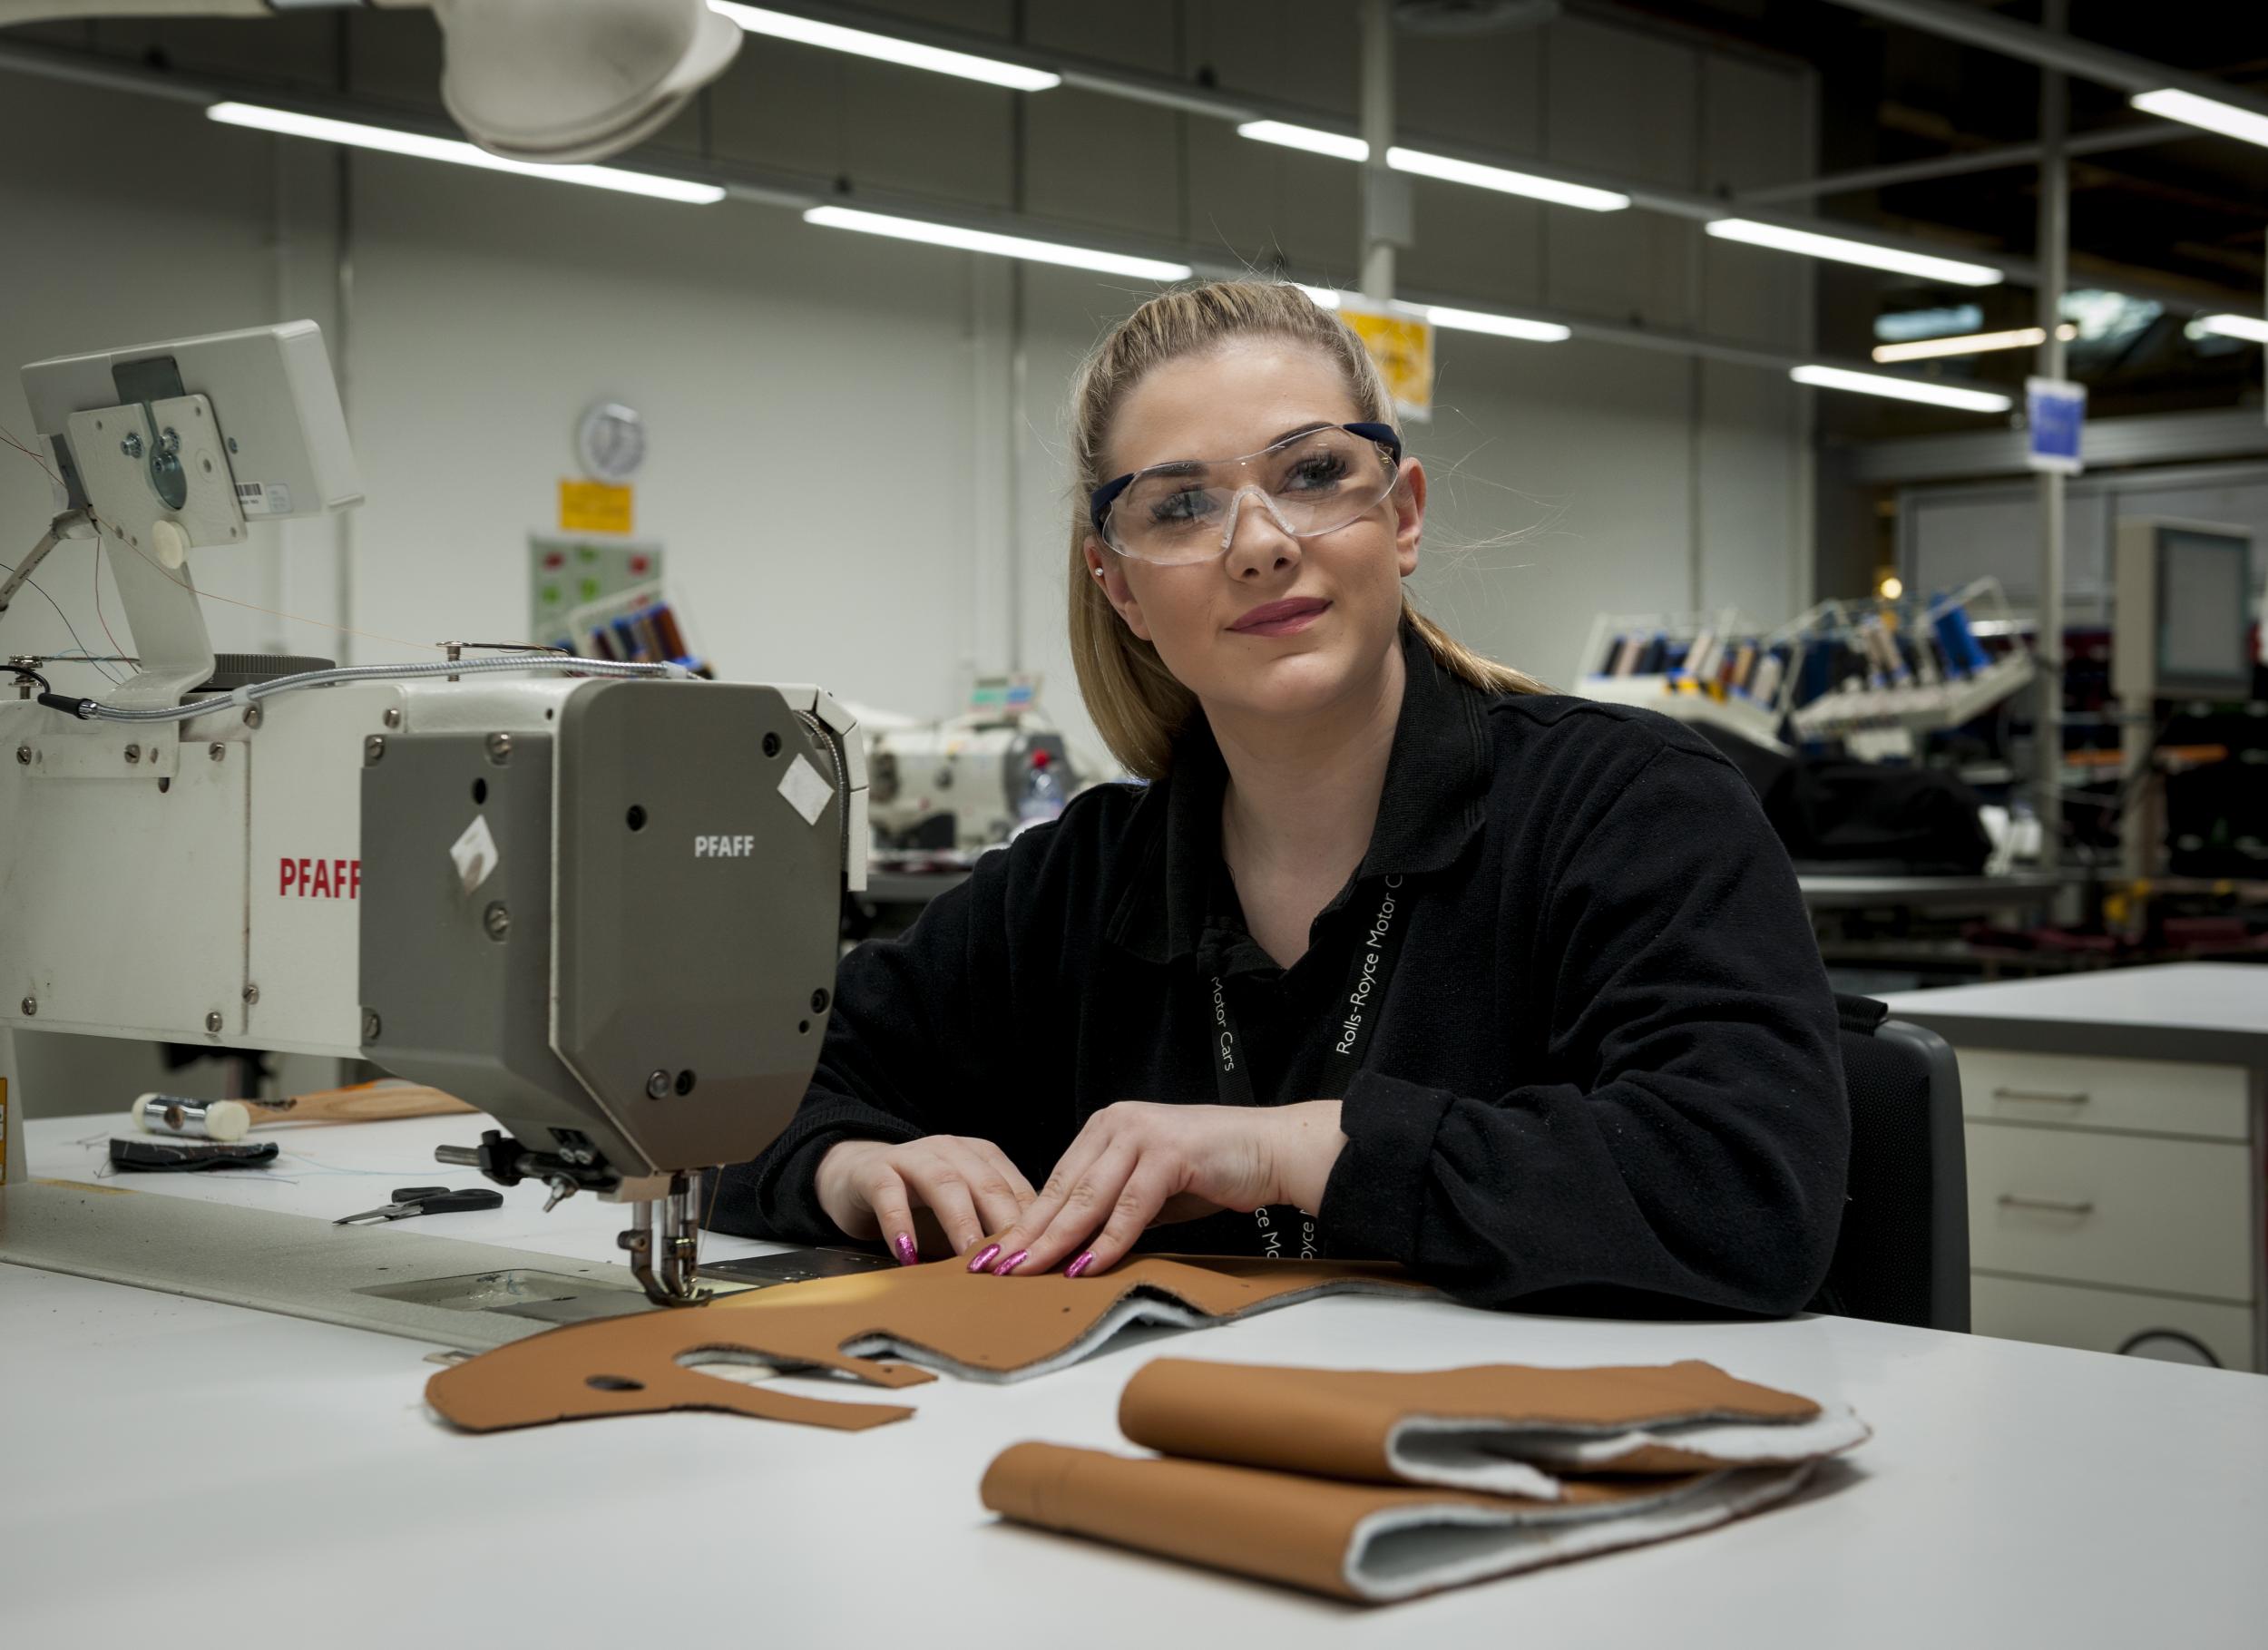 Apprentice Georgia Dickinson learns the craft of leather working